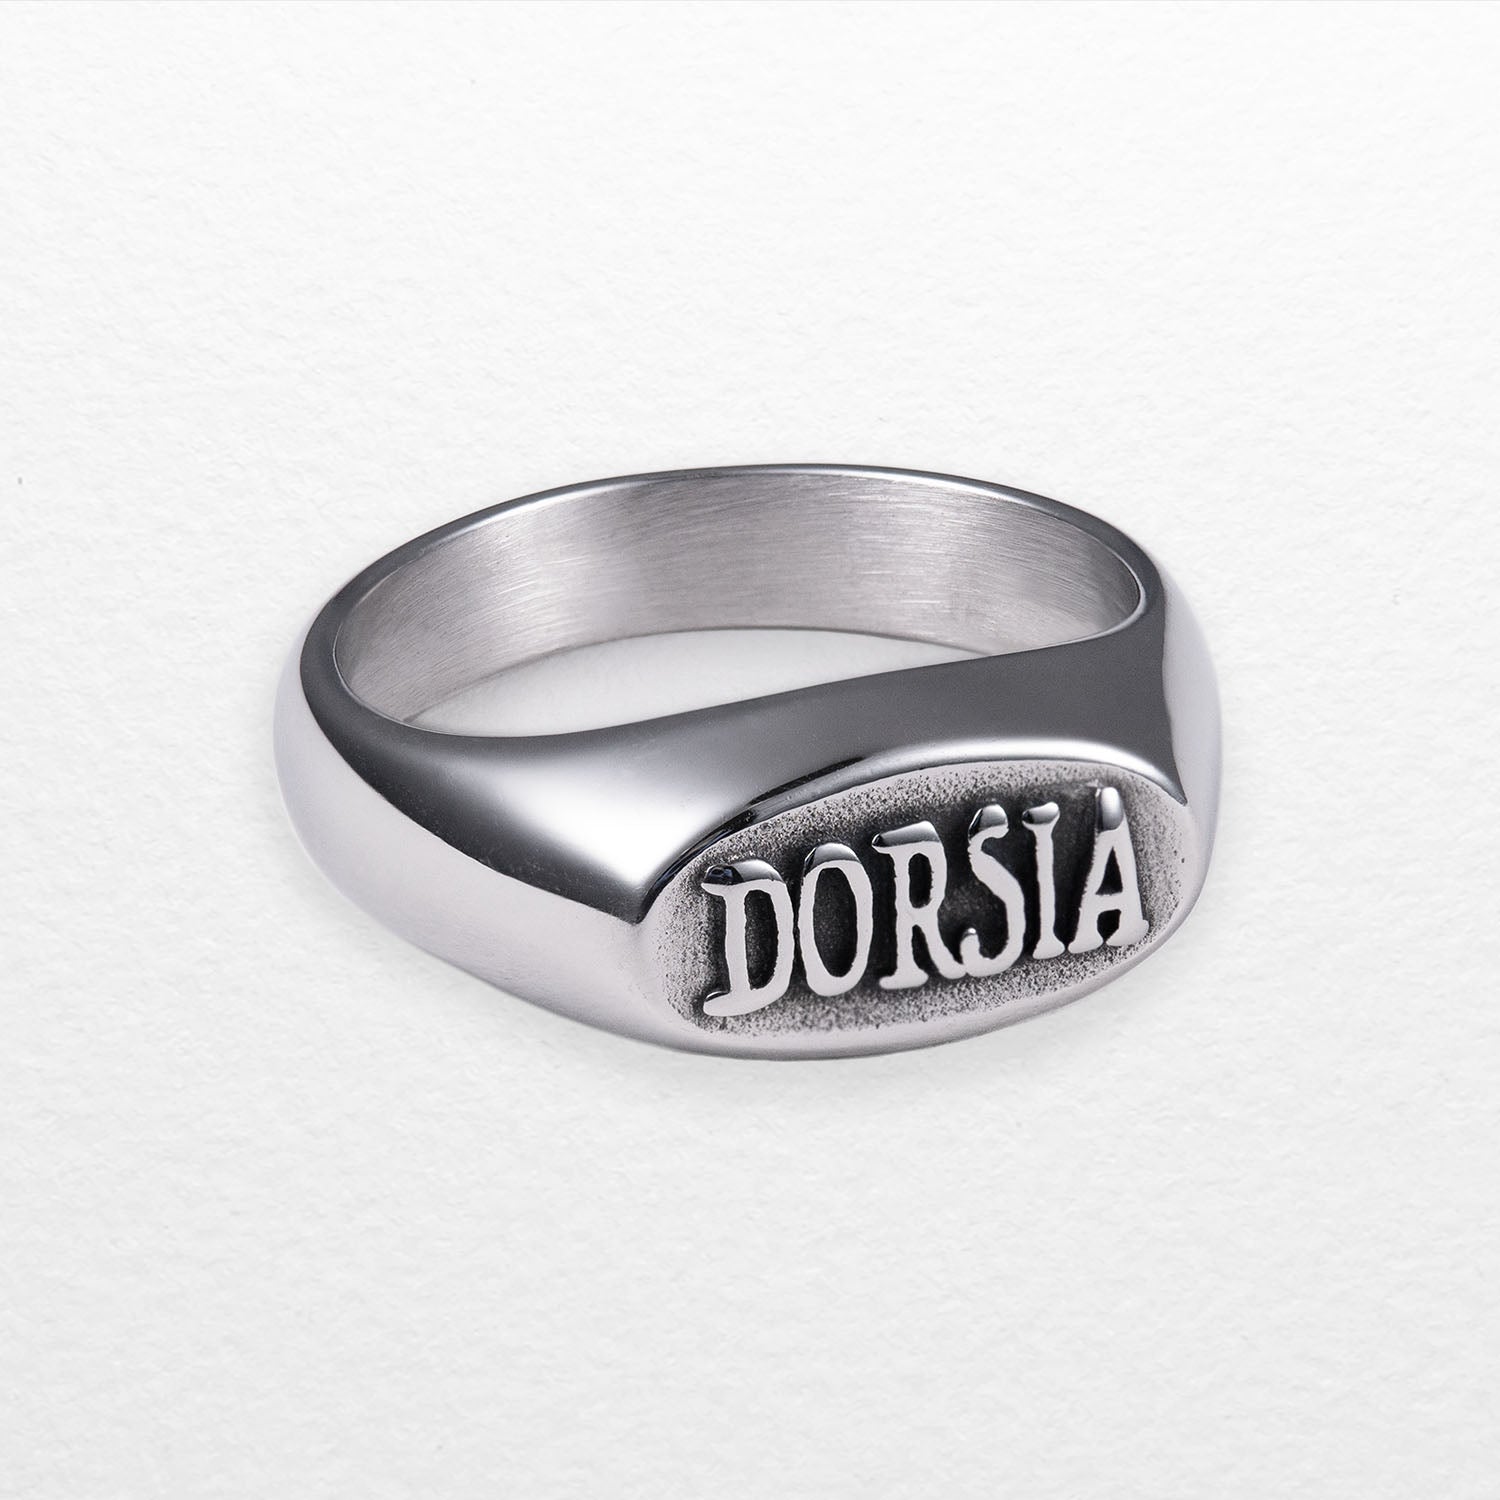 Personal Fears X American Psycho Dorsia Ring in stainless steel